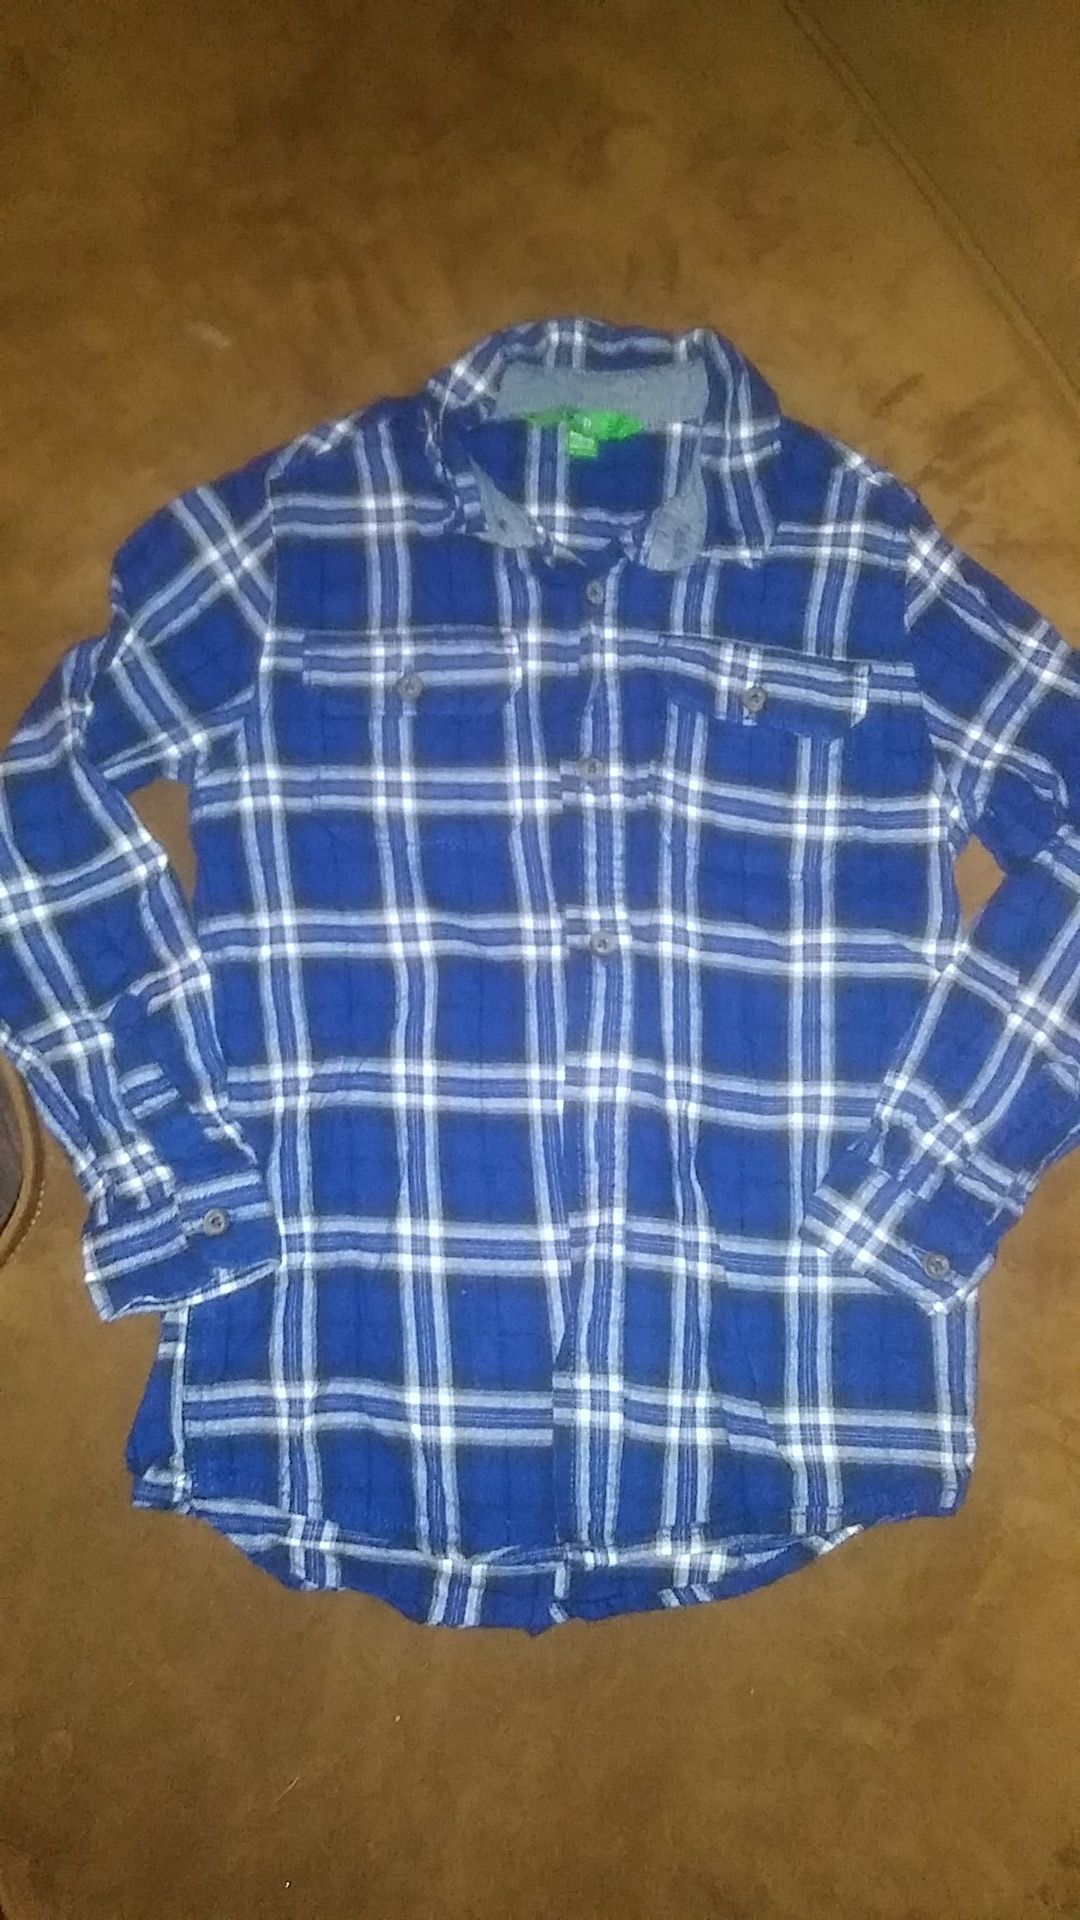 Like new. Boys size Med/8-10. Button down